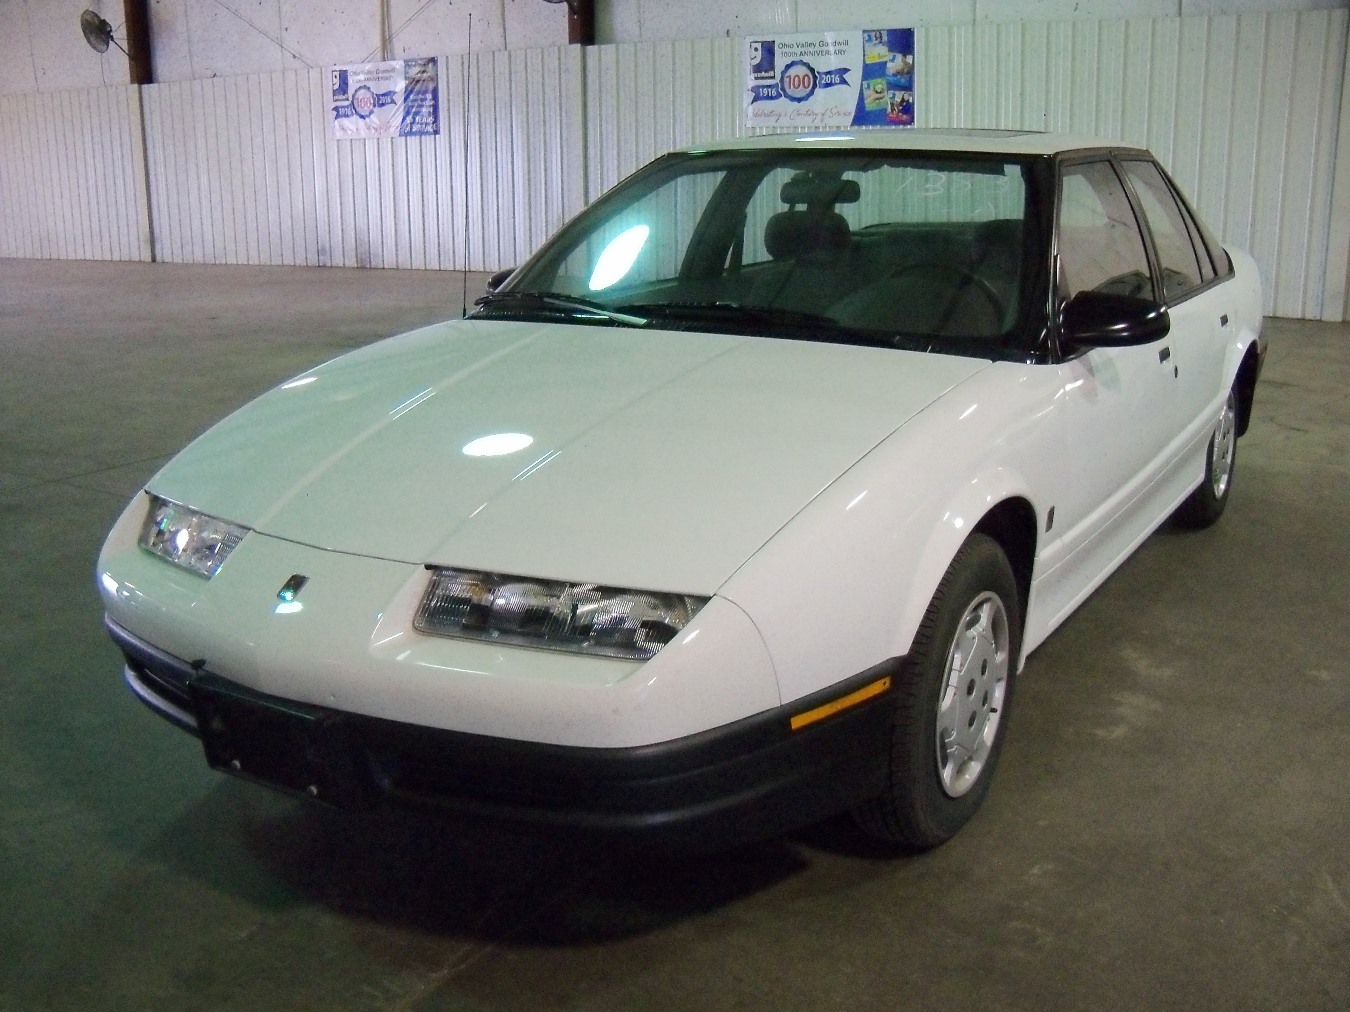 Out-of-This-World Saturn SL1 Featured at Cincinnati Auto Auction - Goodwill  Auto Auction